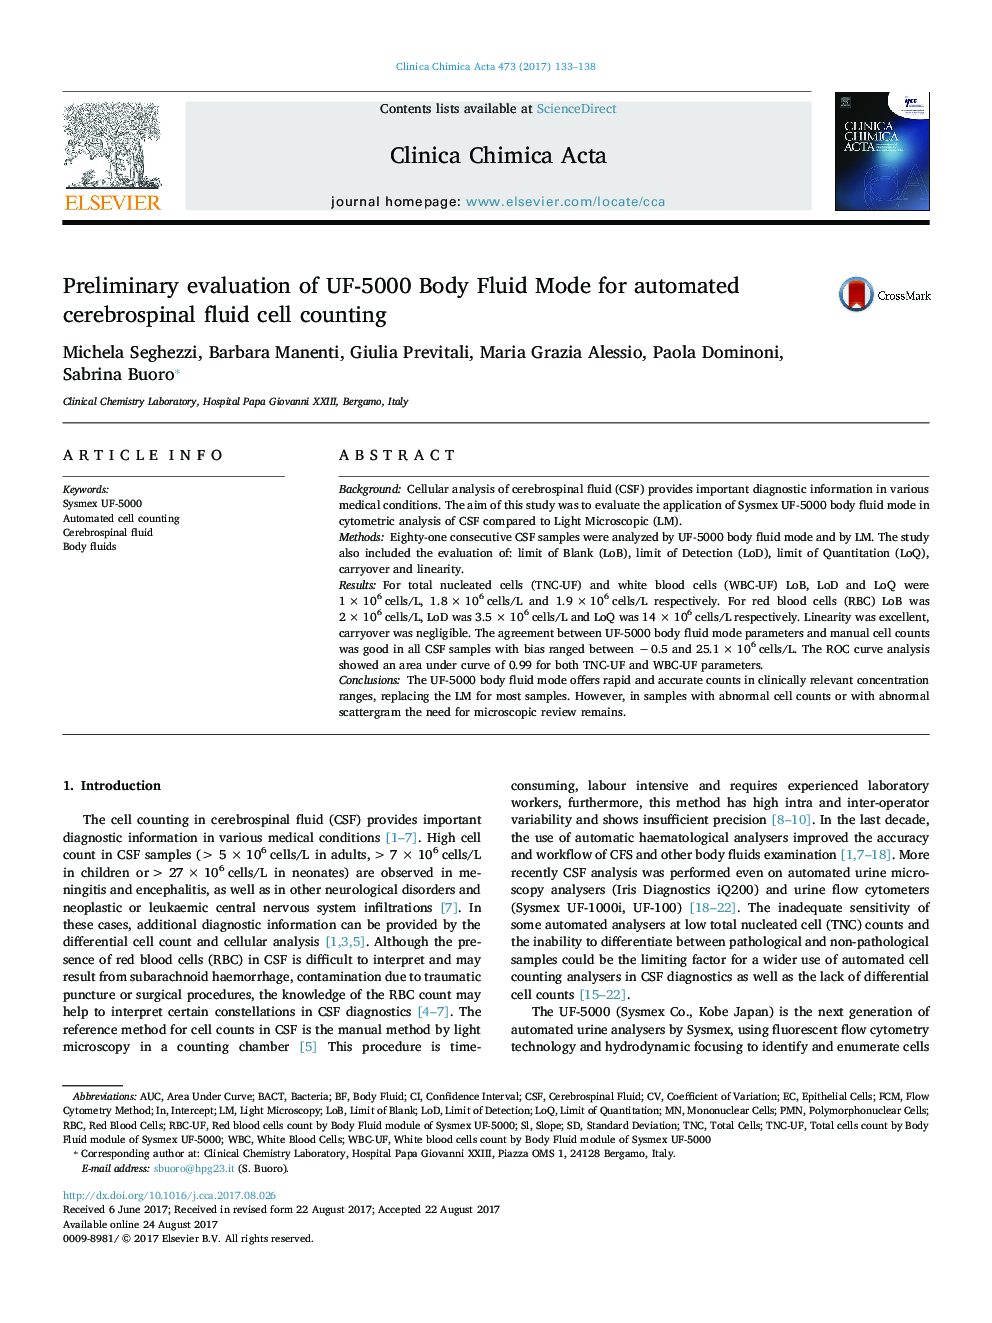 Preliminary evaluation of UF-5000 Body Fluid Mode for automated cerebrospinal fluid cell counting